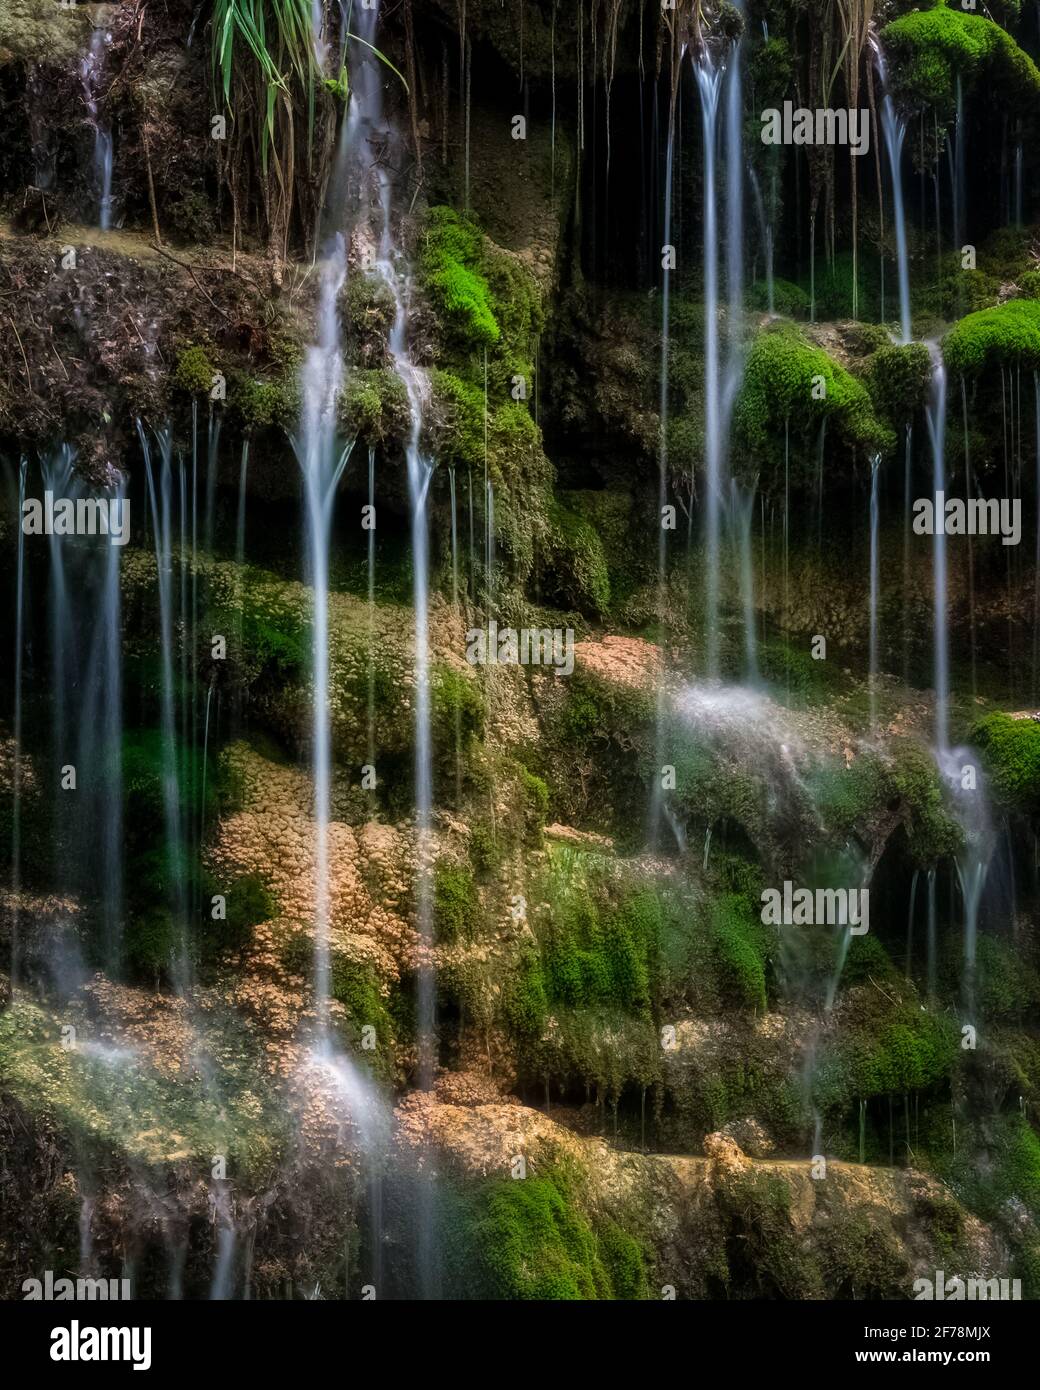 Intimate streams of water cascading down a mossy cliff face. Stock Photo